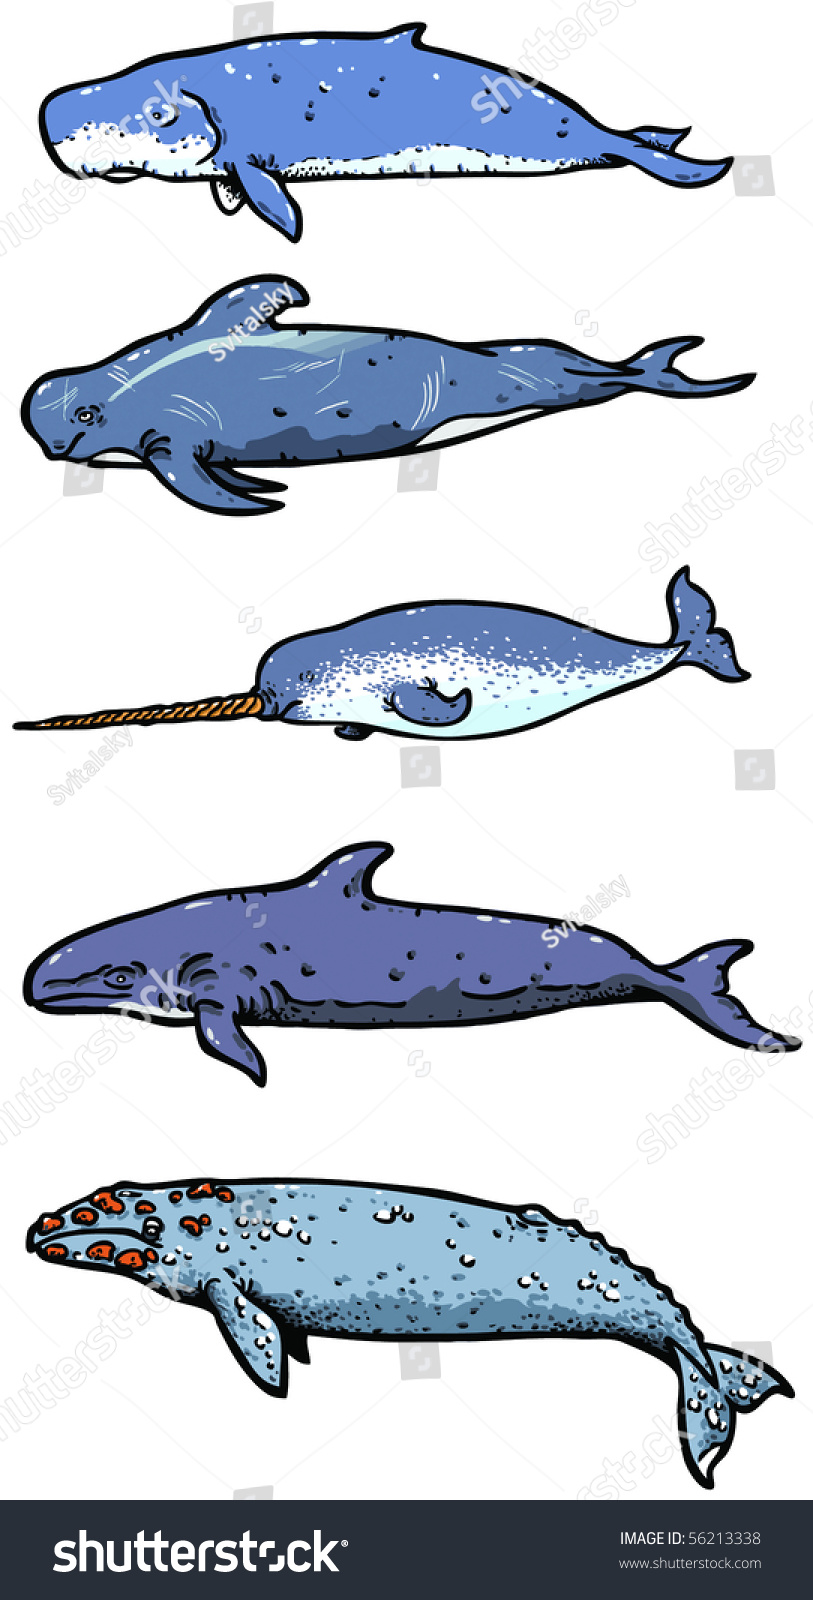 How many types of whales are there?